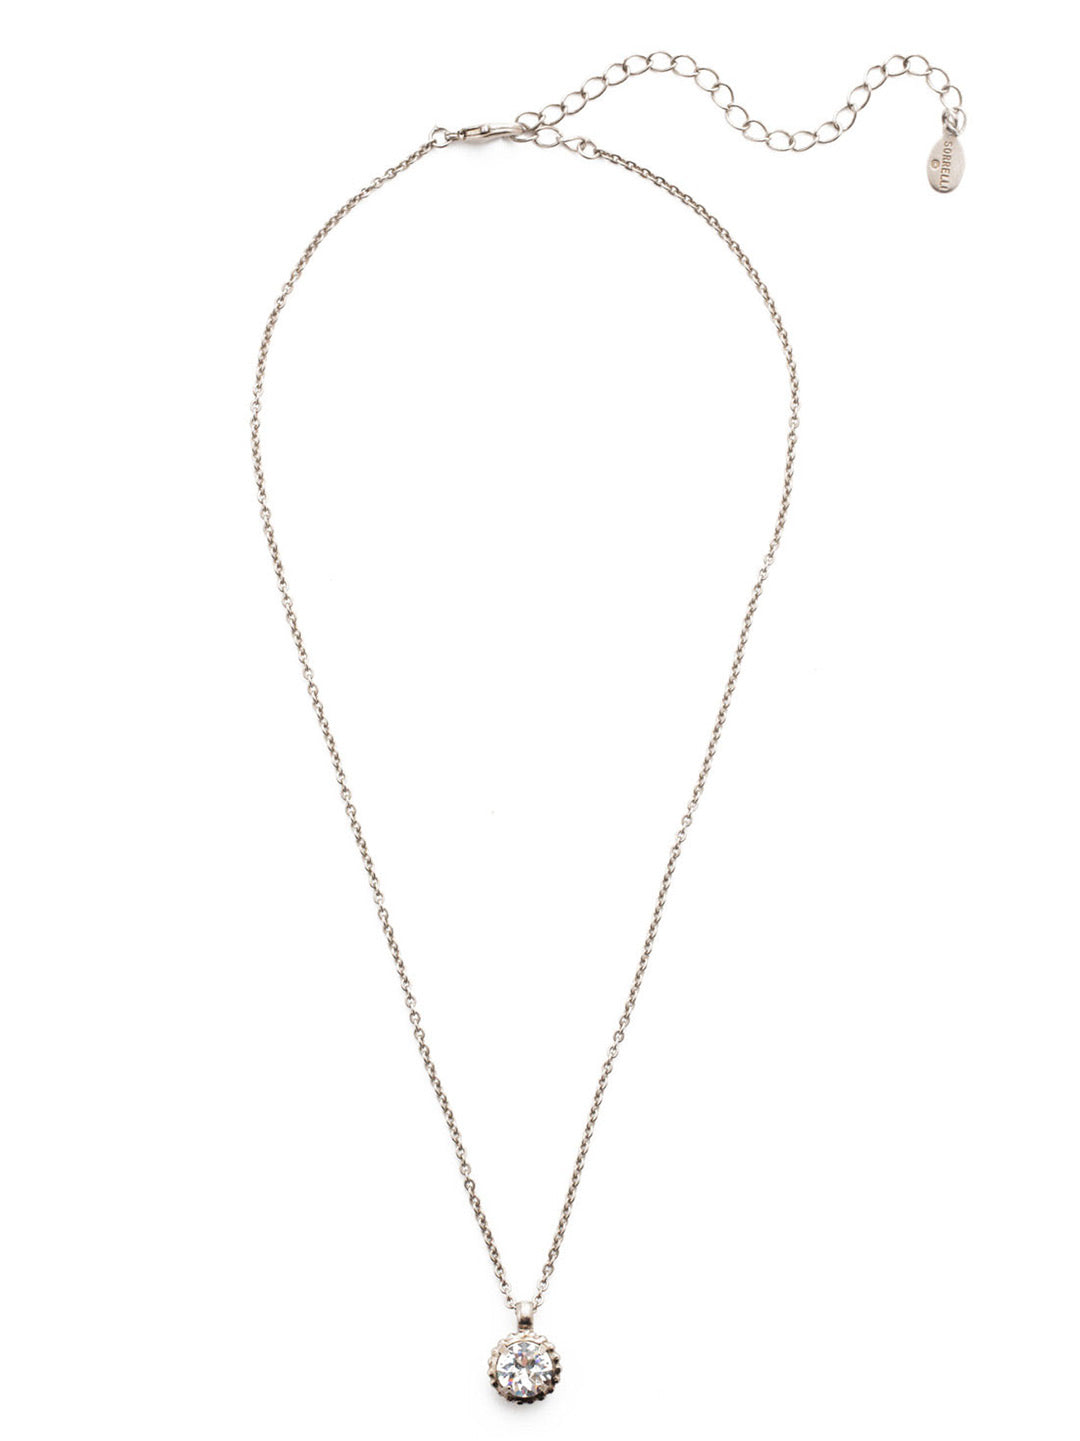 Simplicity Pendant Necklace - NBY38ASCRY